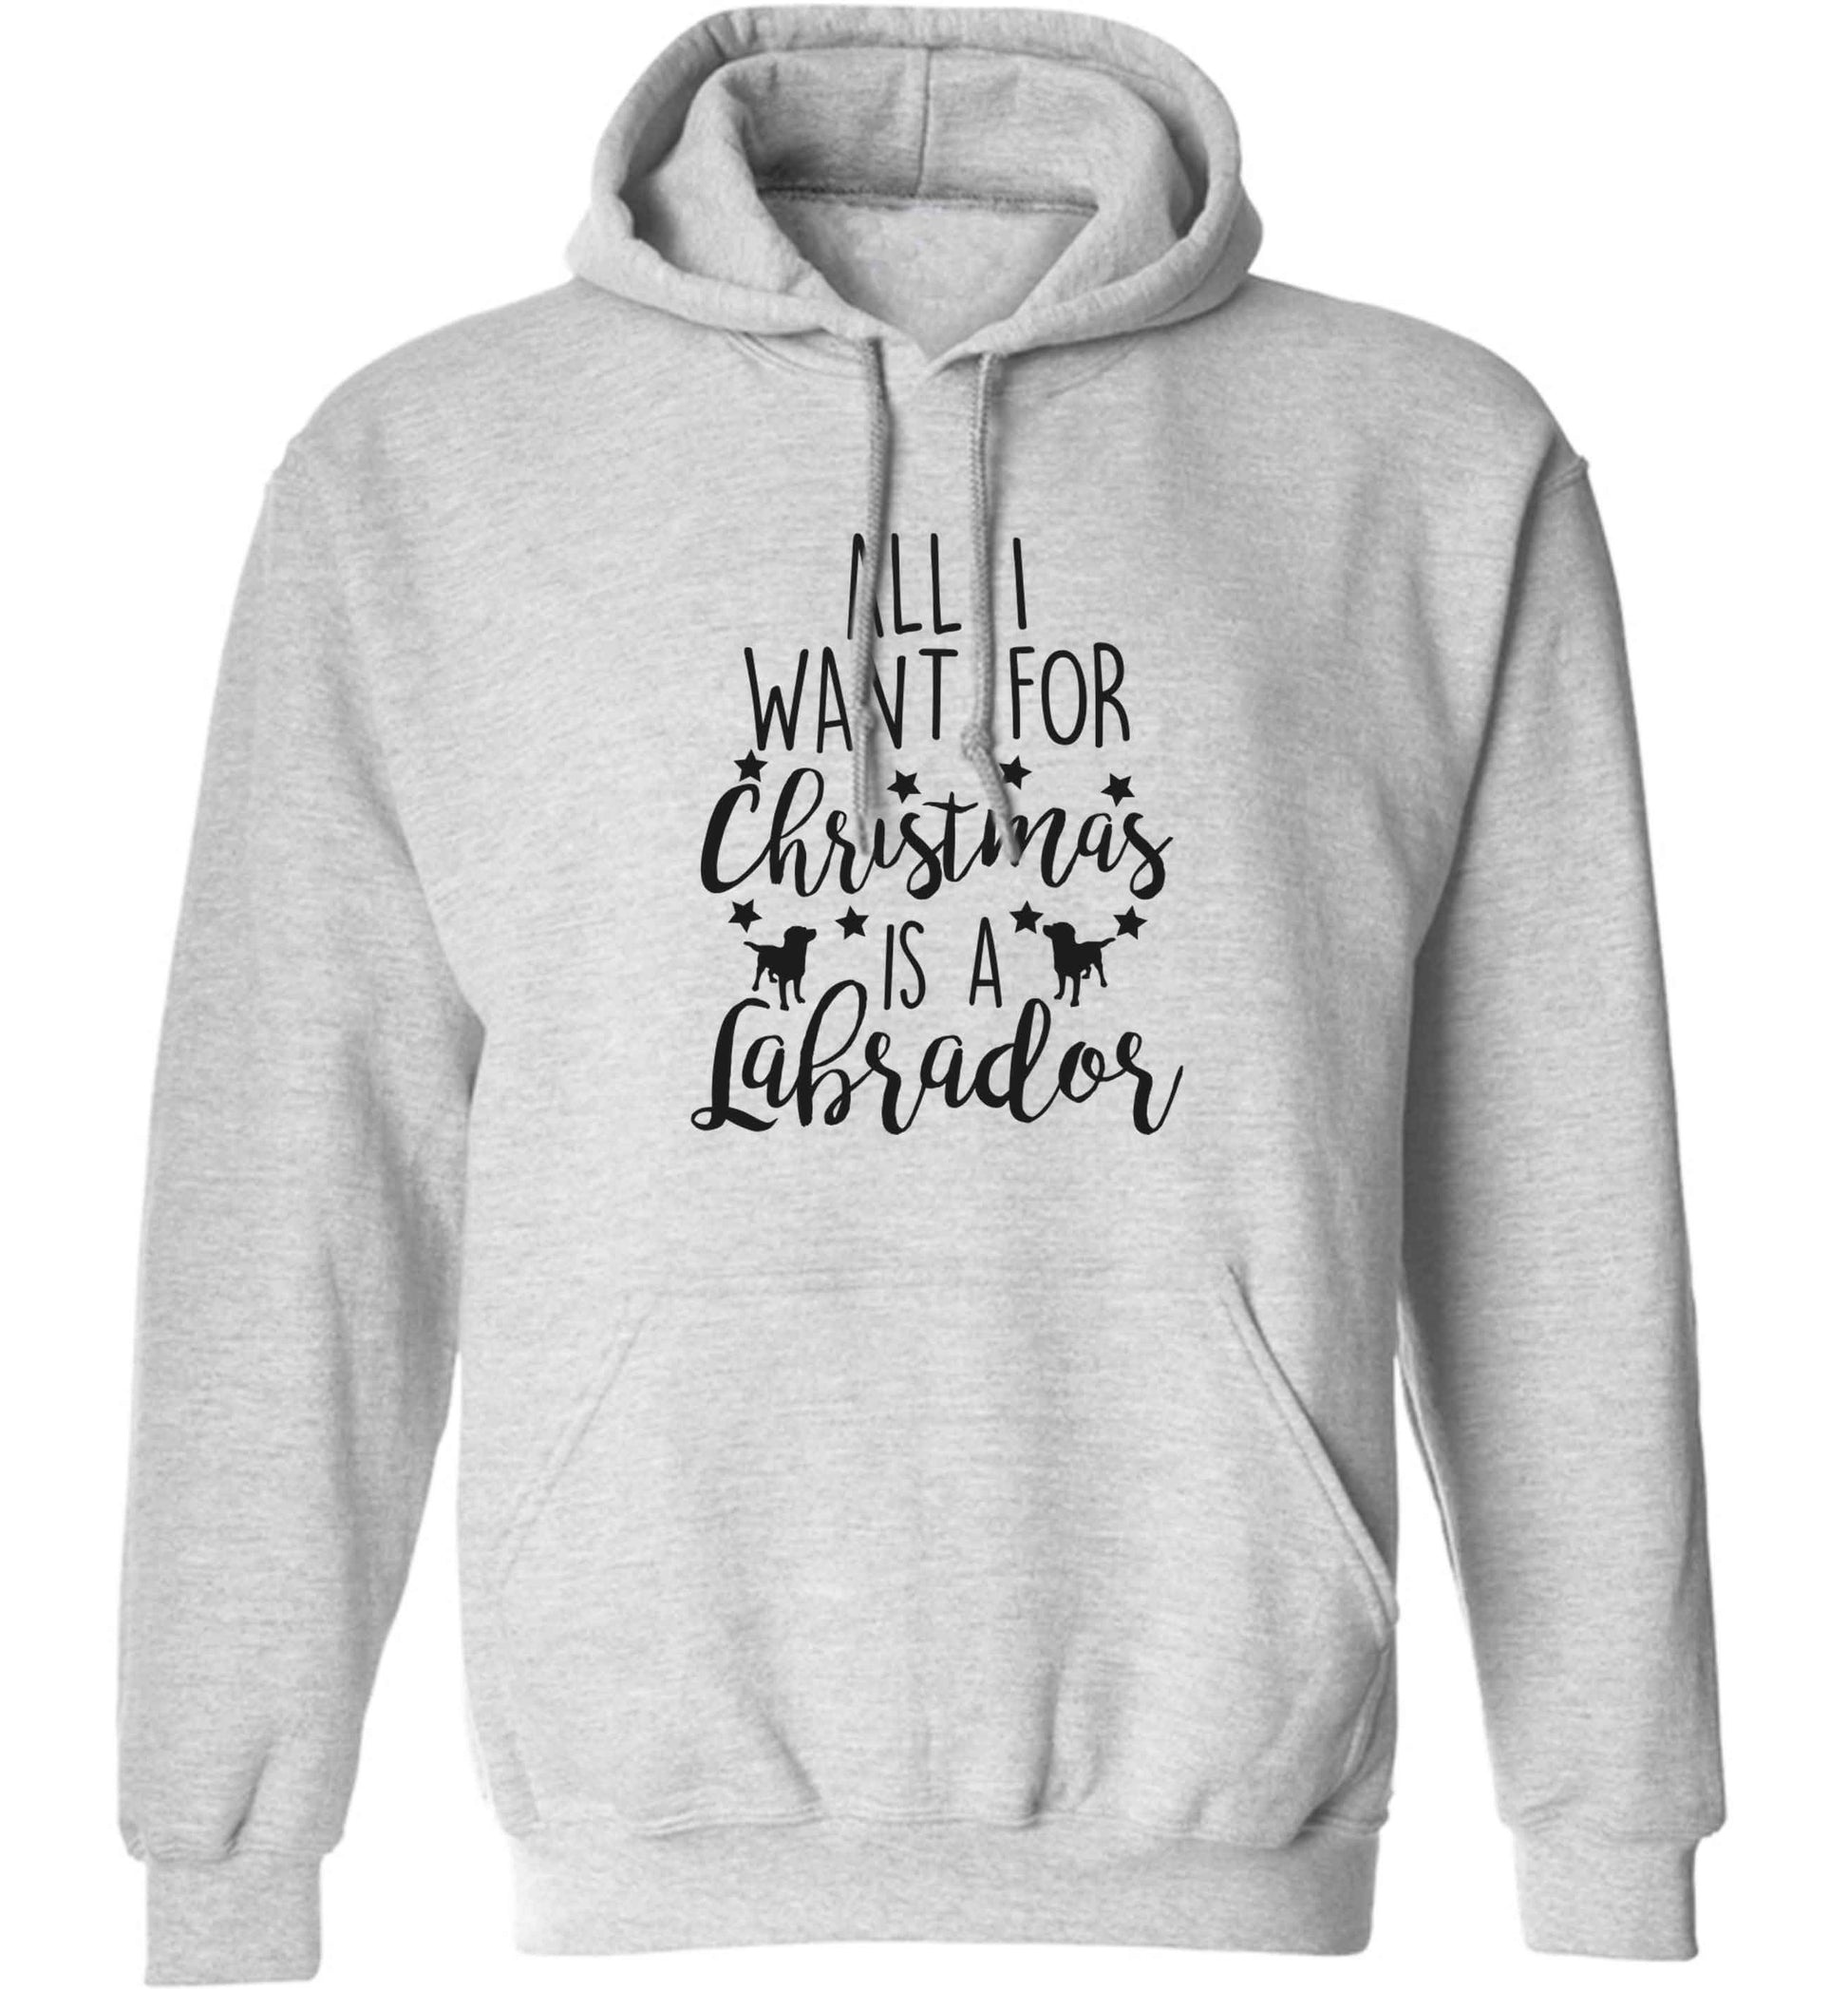 All I want for Christmas is a labrador adults unisex grey hoodie 2XL